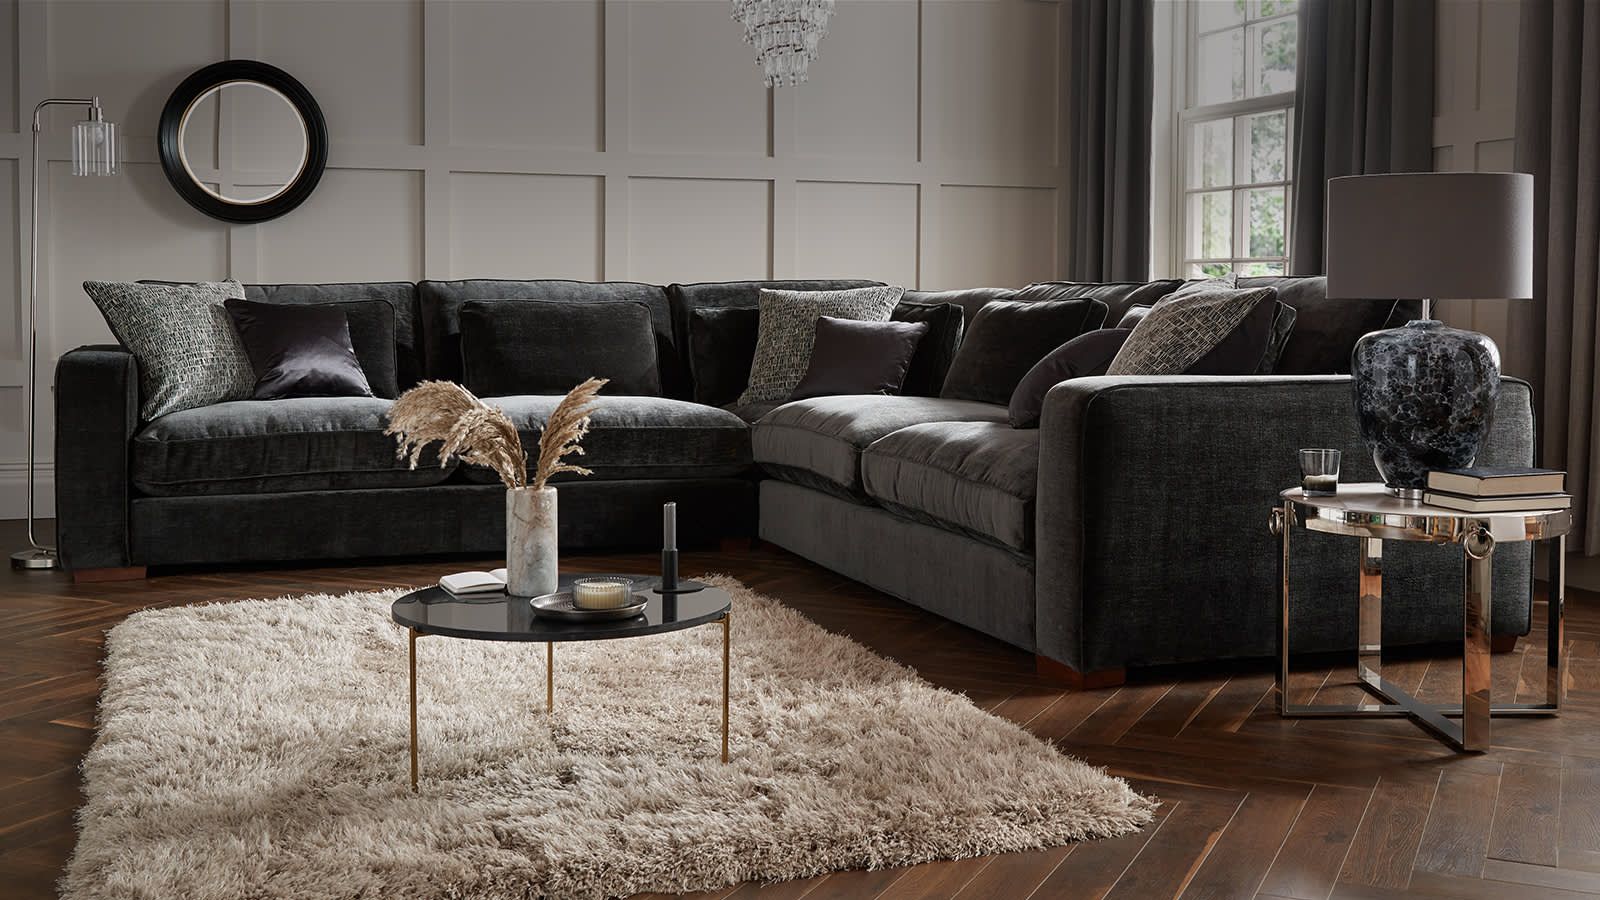 A Buying Guide For Corner Sofas | Sofology With Regard To Microfiber Sectional Corner Sofas (View 8 of 15)